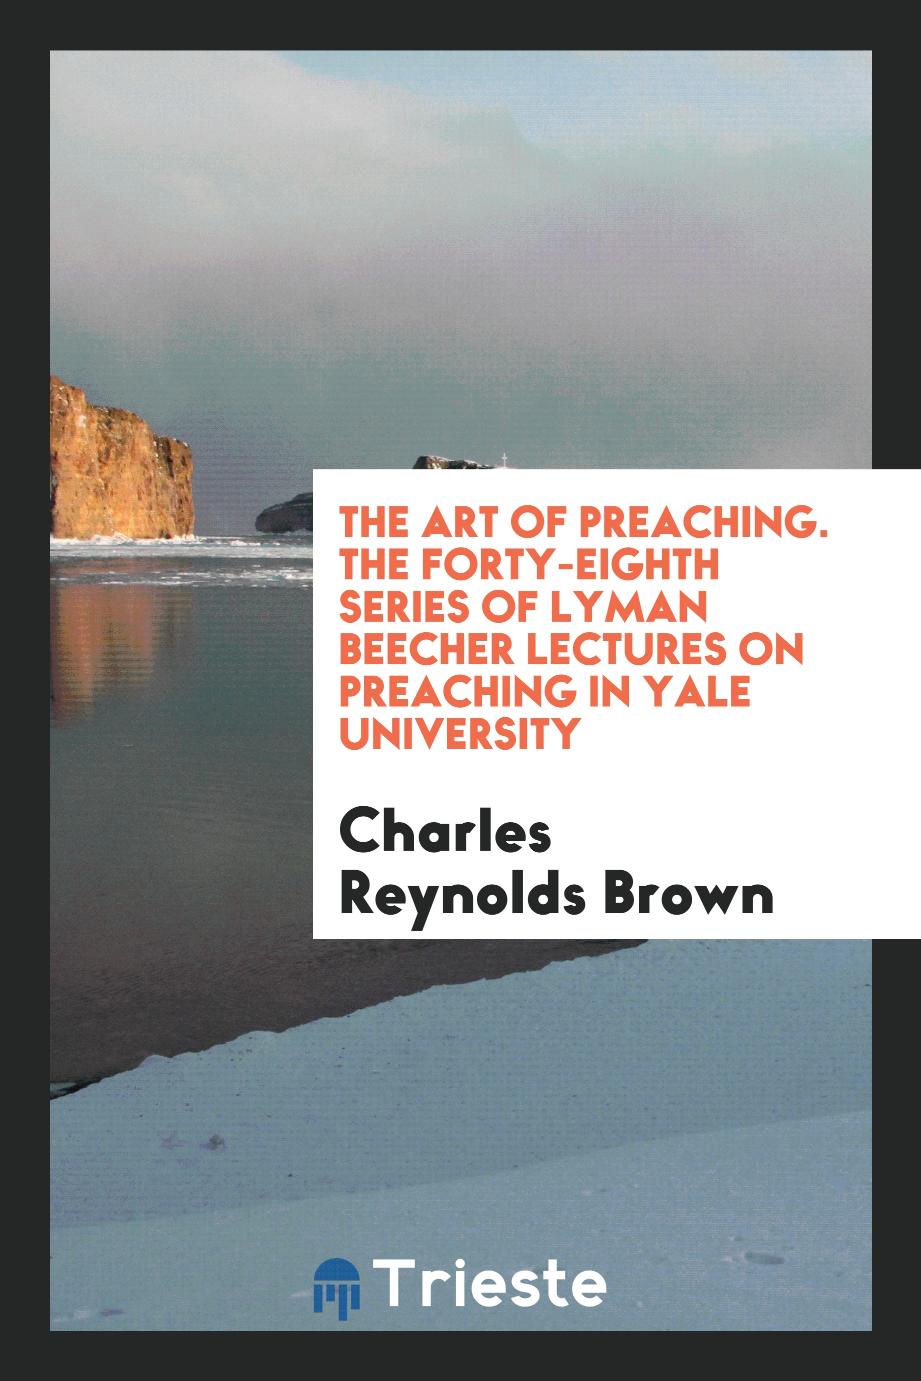 The Art of Preaching. The Forty-Eighth Series of Lyman Beecher Lectures on Preaching in Yale University